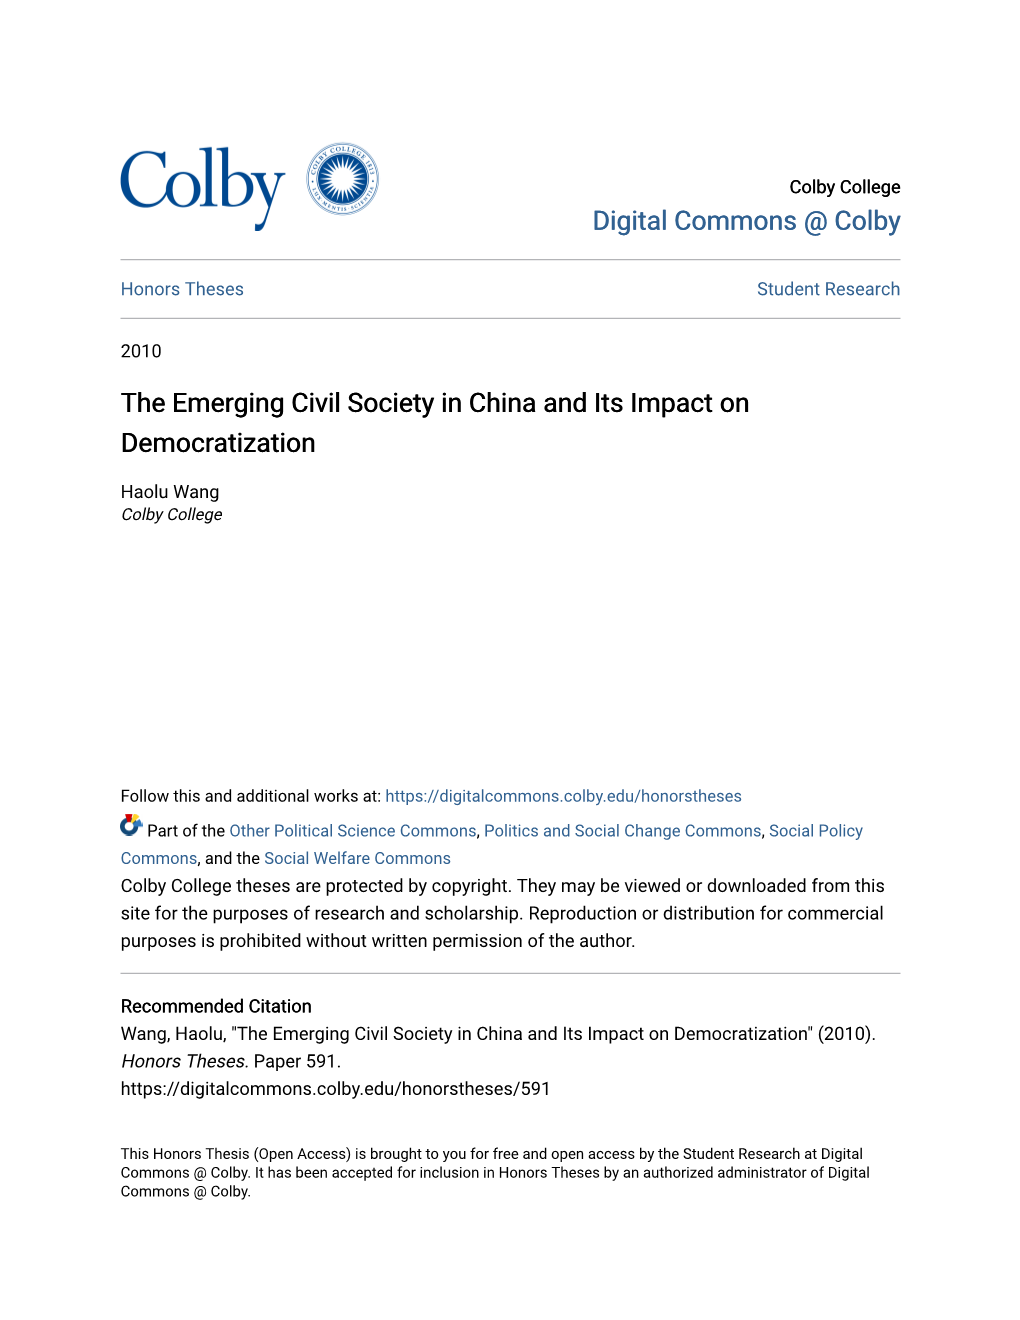 The Emerging Civil Society in China and Its Impact on Democratization